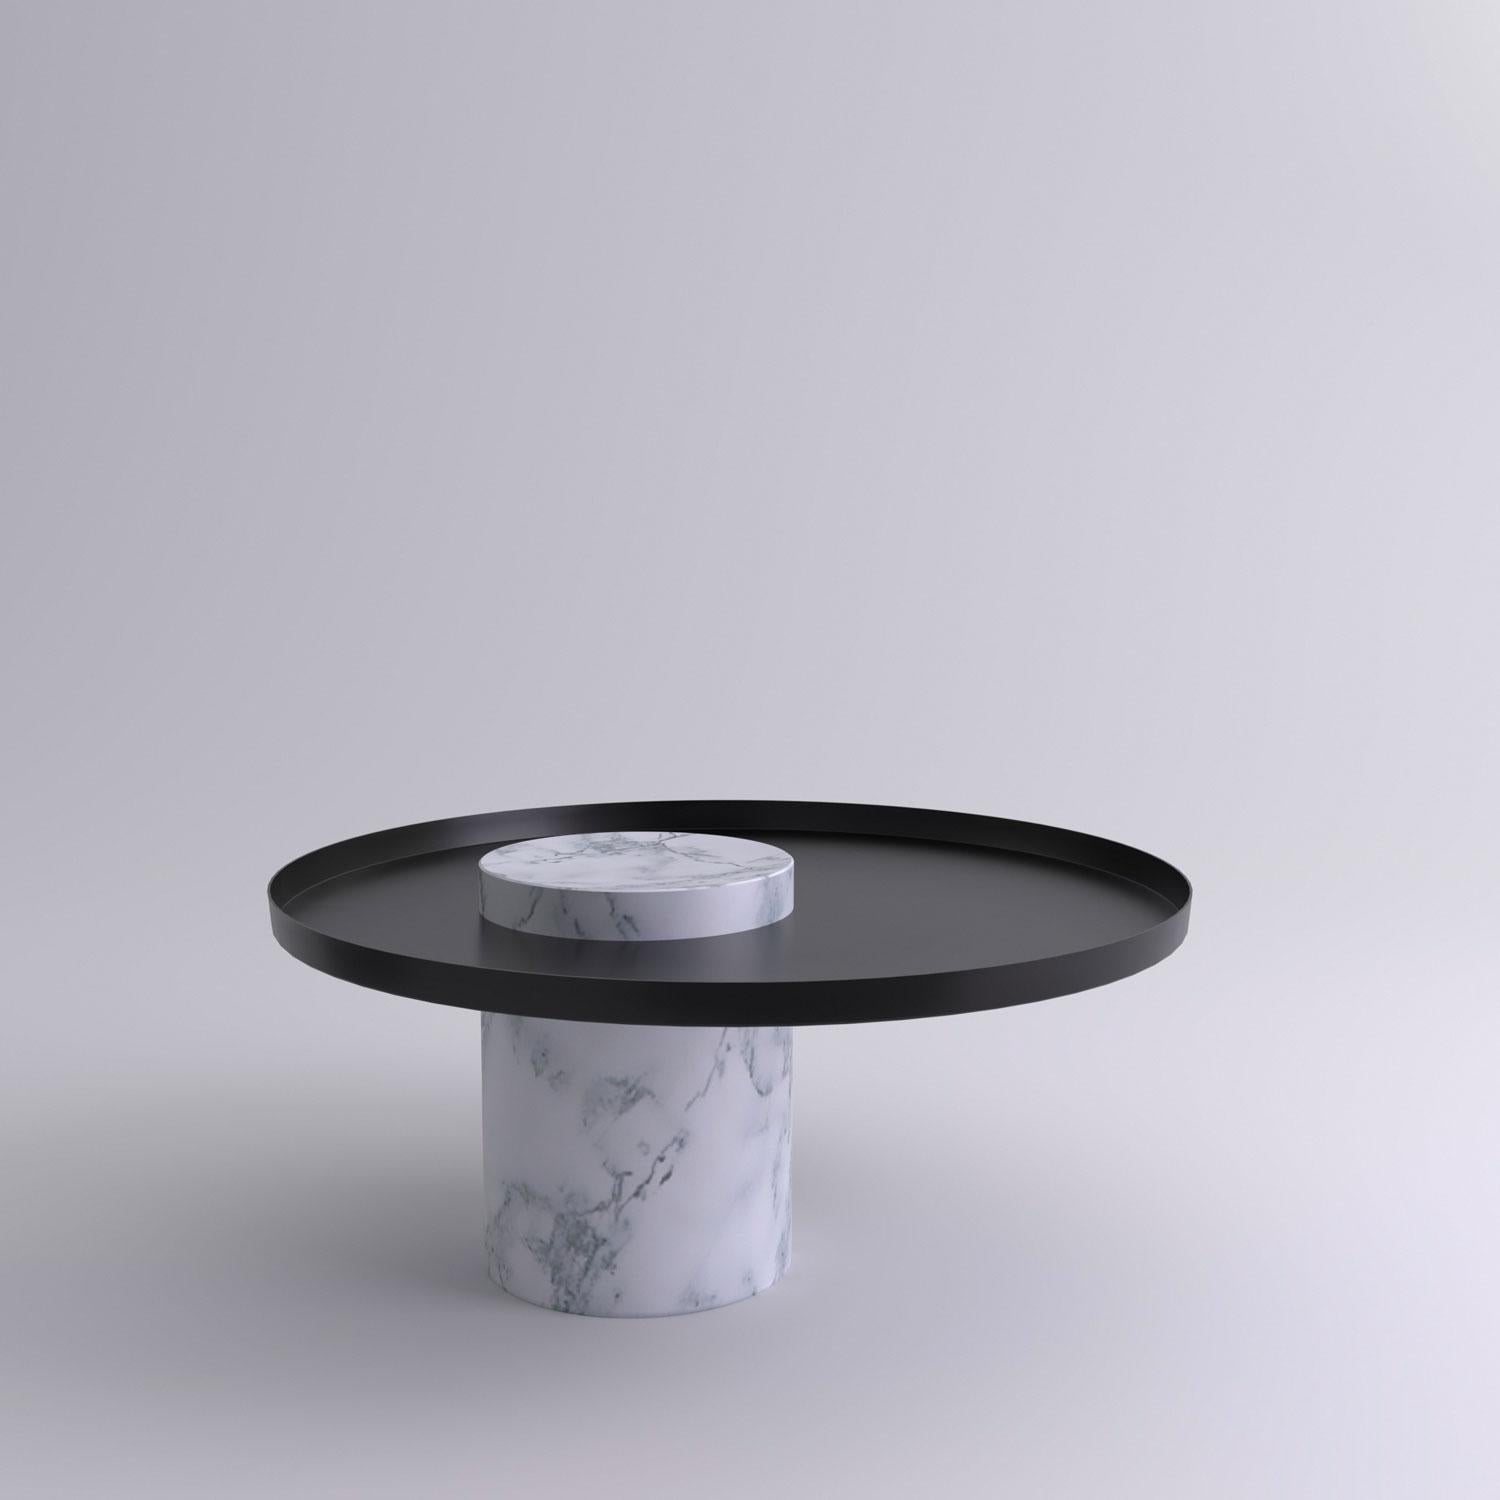 Low white marble contemporary guéridon, Sebastian Herkner
Dimensions: D 70 x H 33 cm
Materials: Pele de Tigre marble, black metal tray

The salute table exists in 3 sizes, 4 different marble stones for the column and 5 different finishes for the